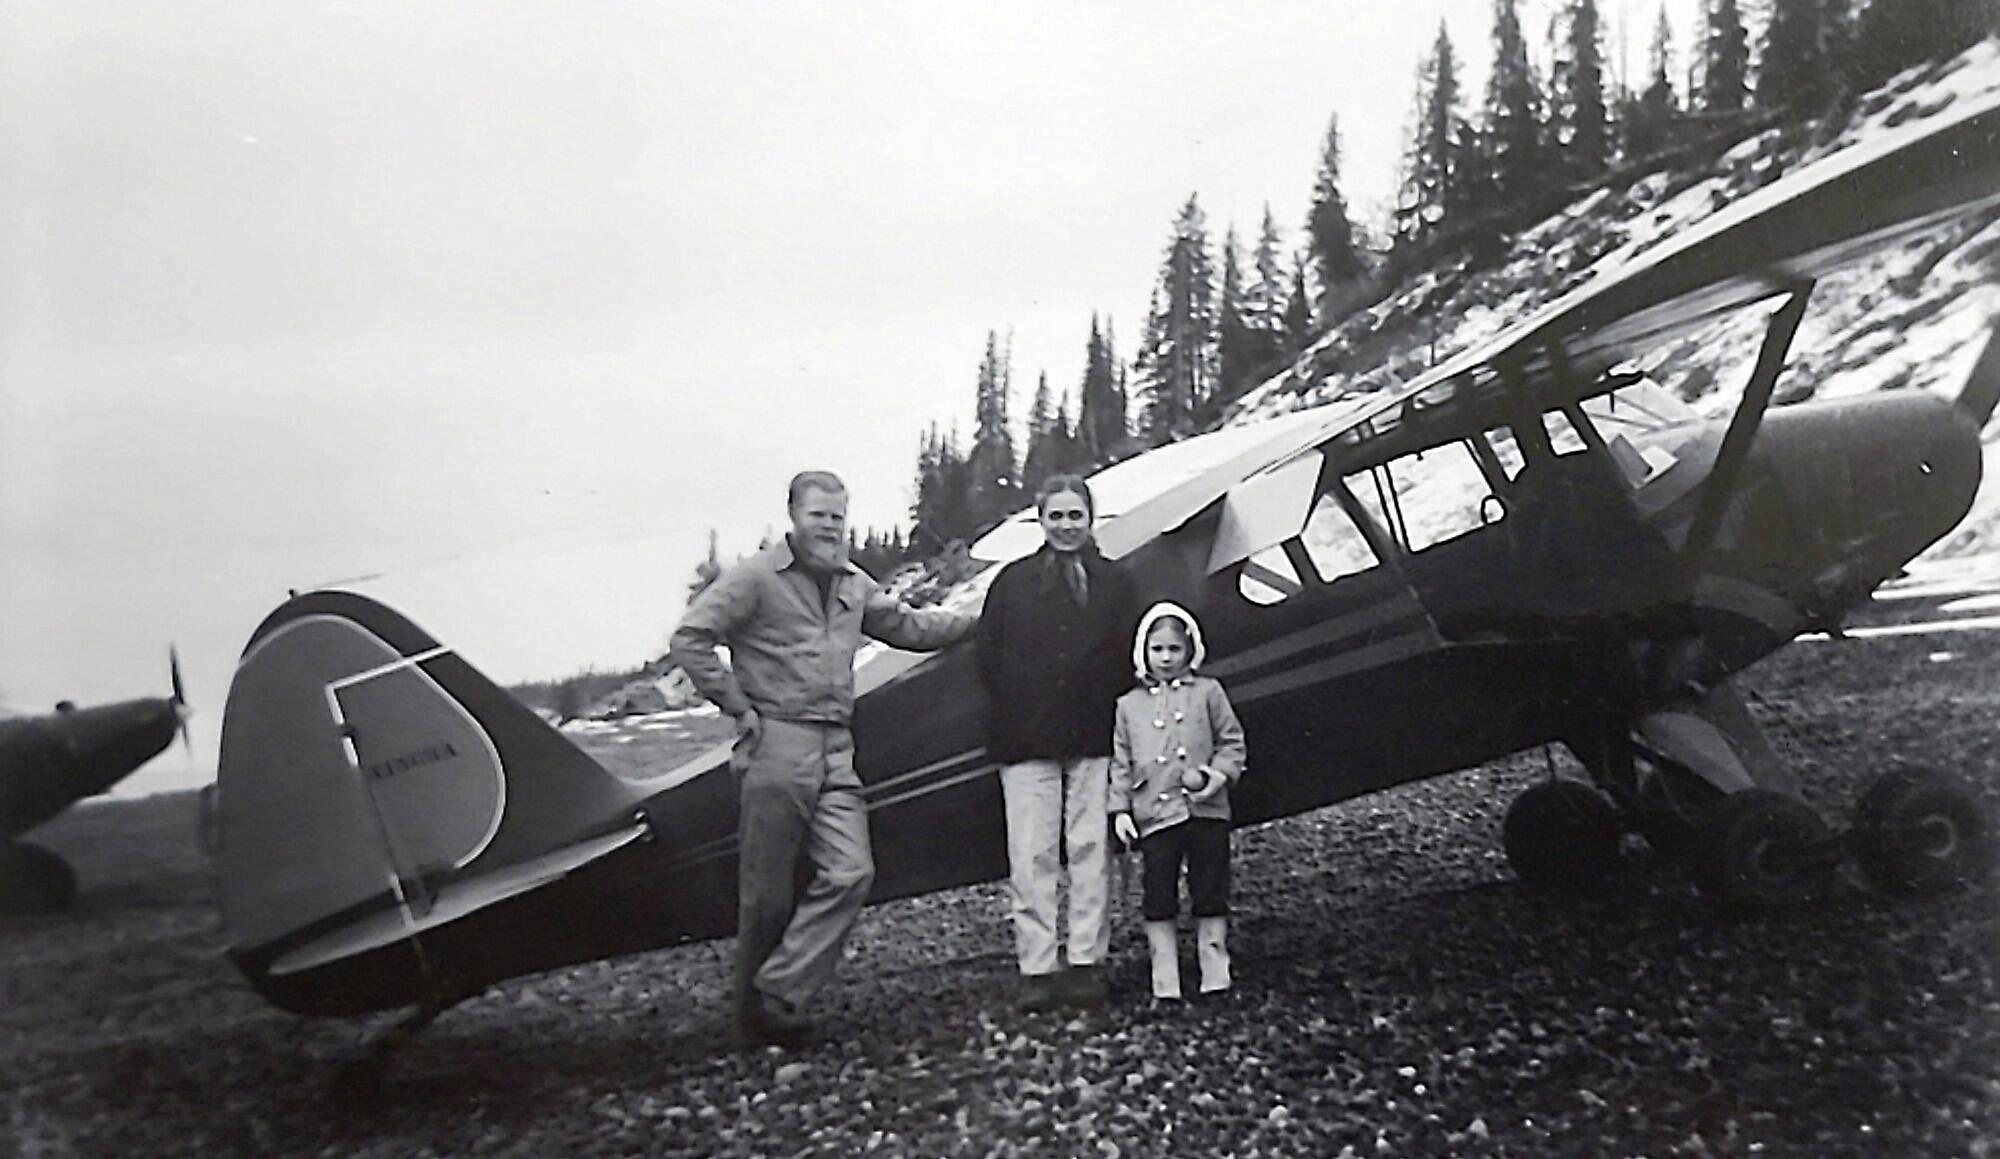 Ben, Marian and Grace Goble pose next to Ben’s airplane on the beach near Kenai in 1959. (Photo courtesy of Ben and Marian Goble)